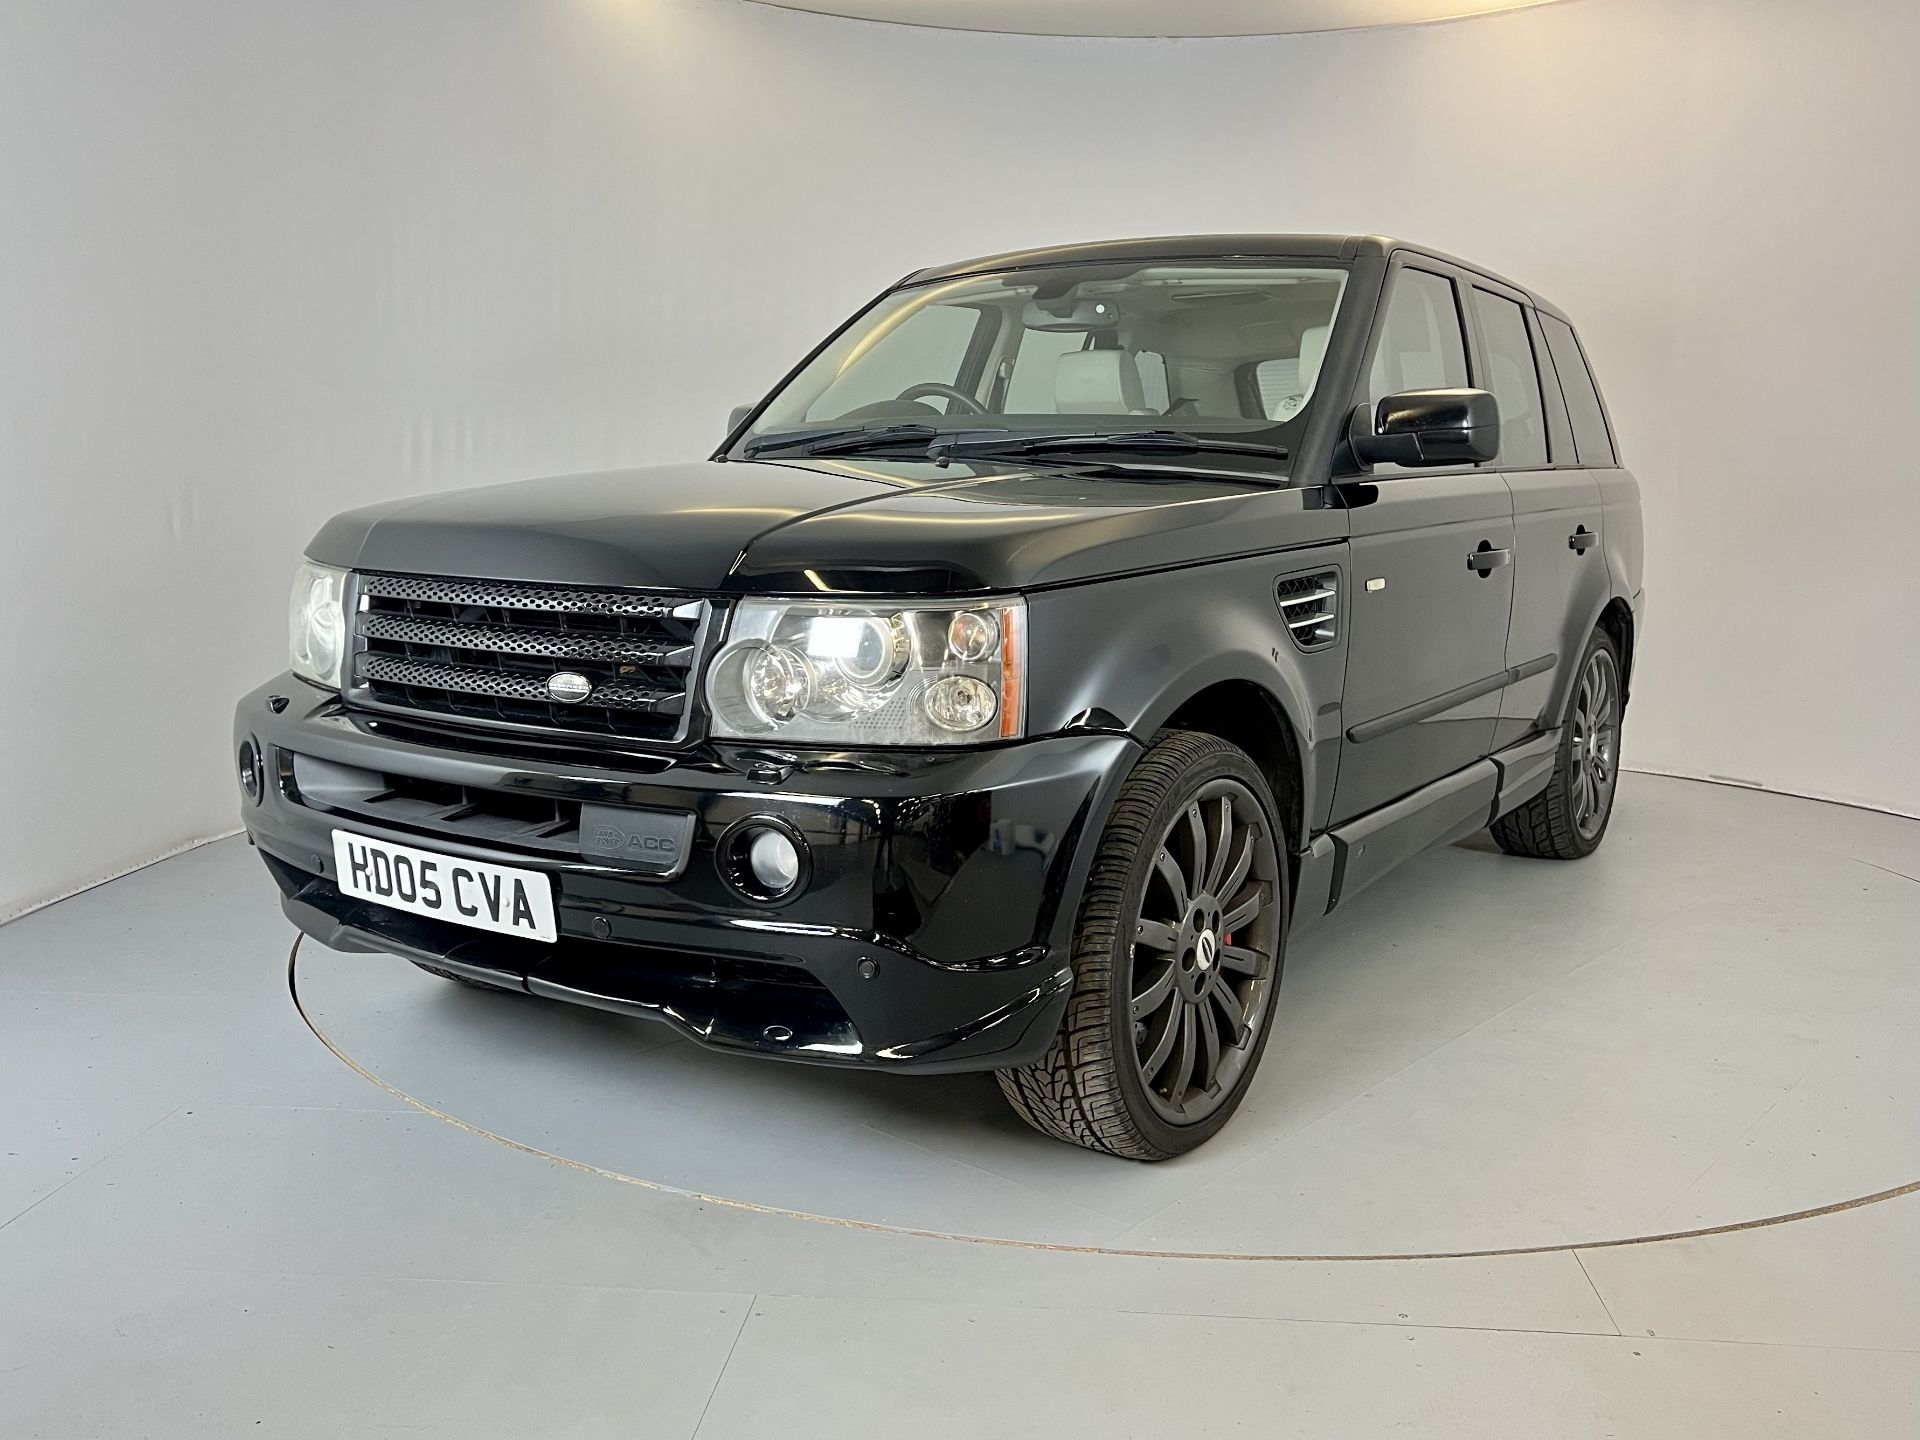 Range Rover Sport 1st Edition 4.2 Supercharged OverFinch - Image 3 of 33